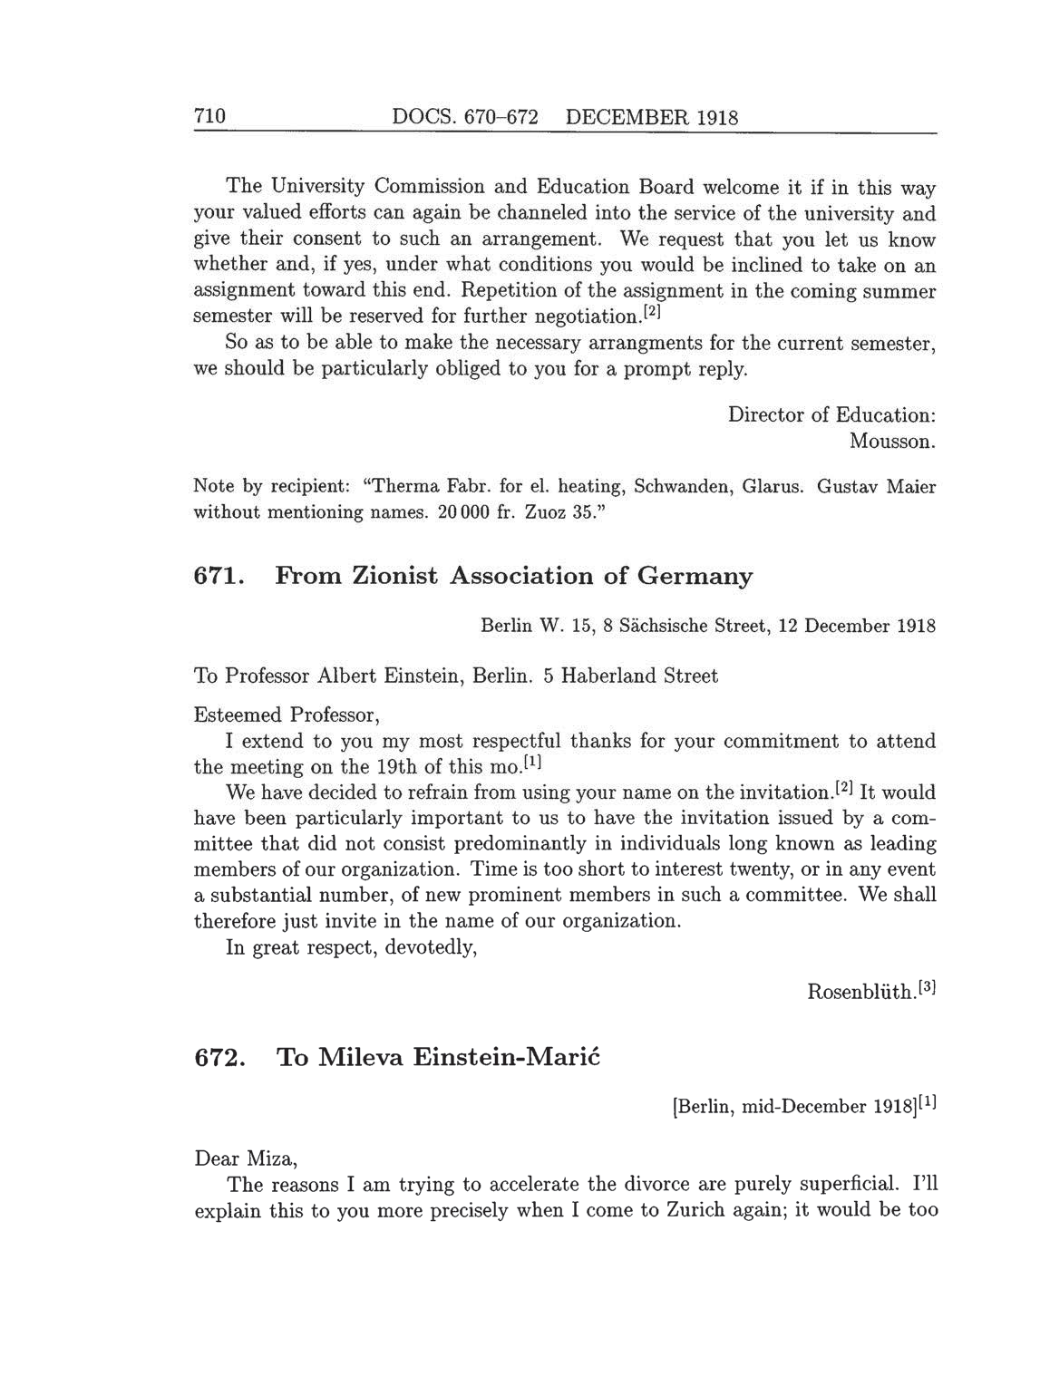 Volume 8: The Berlin Years: Correspondence, 1914-1918 (English translation supplement) page 710